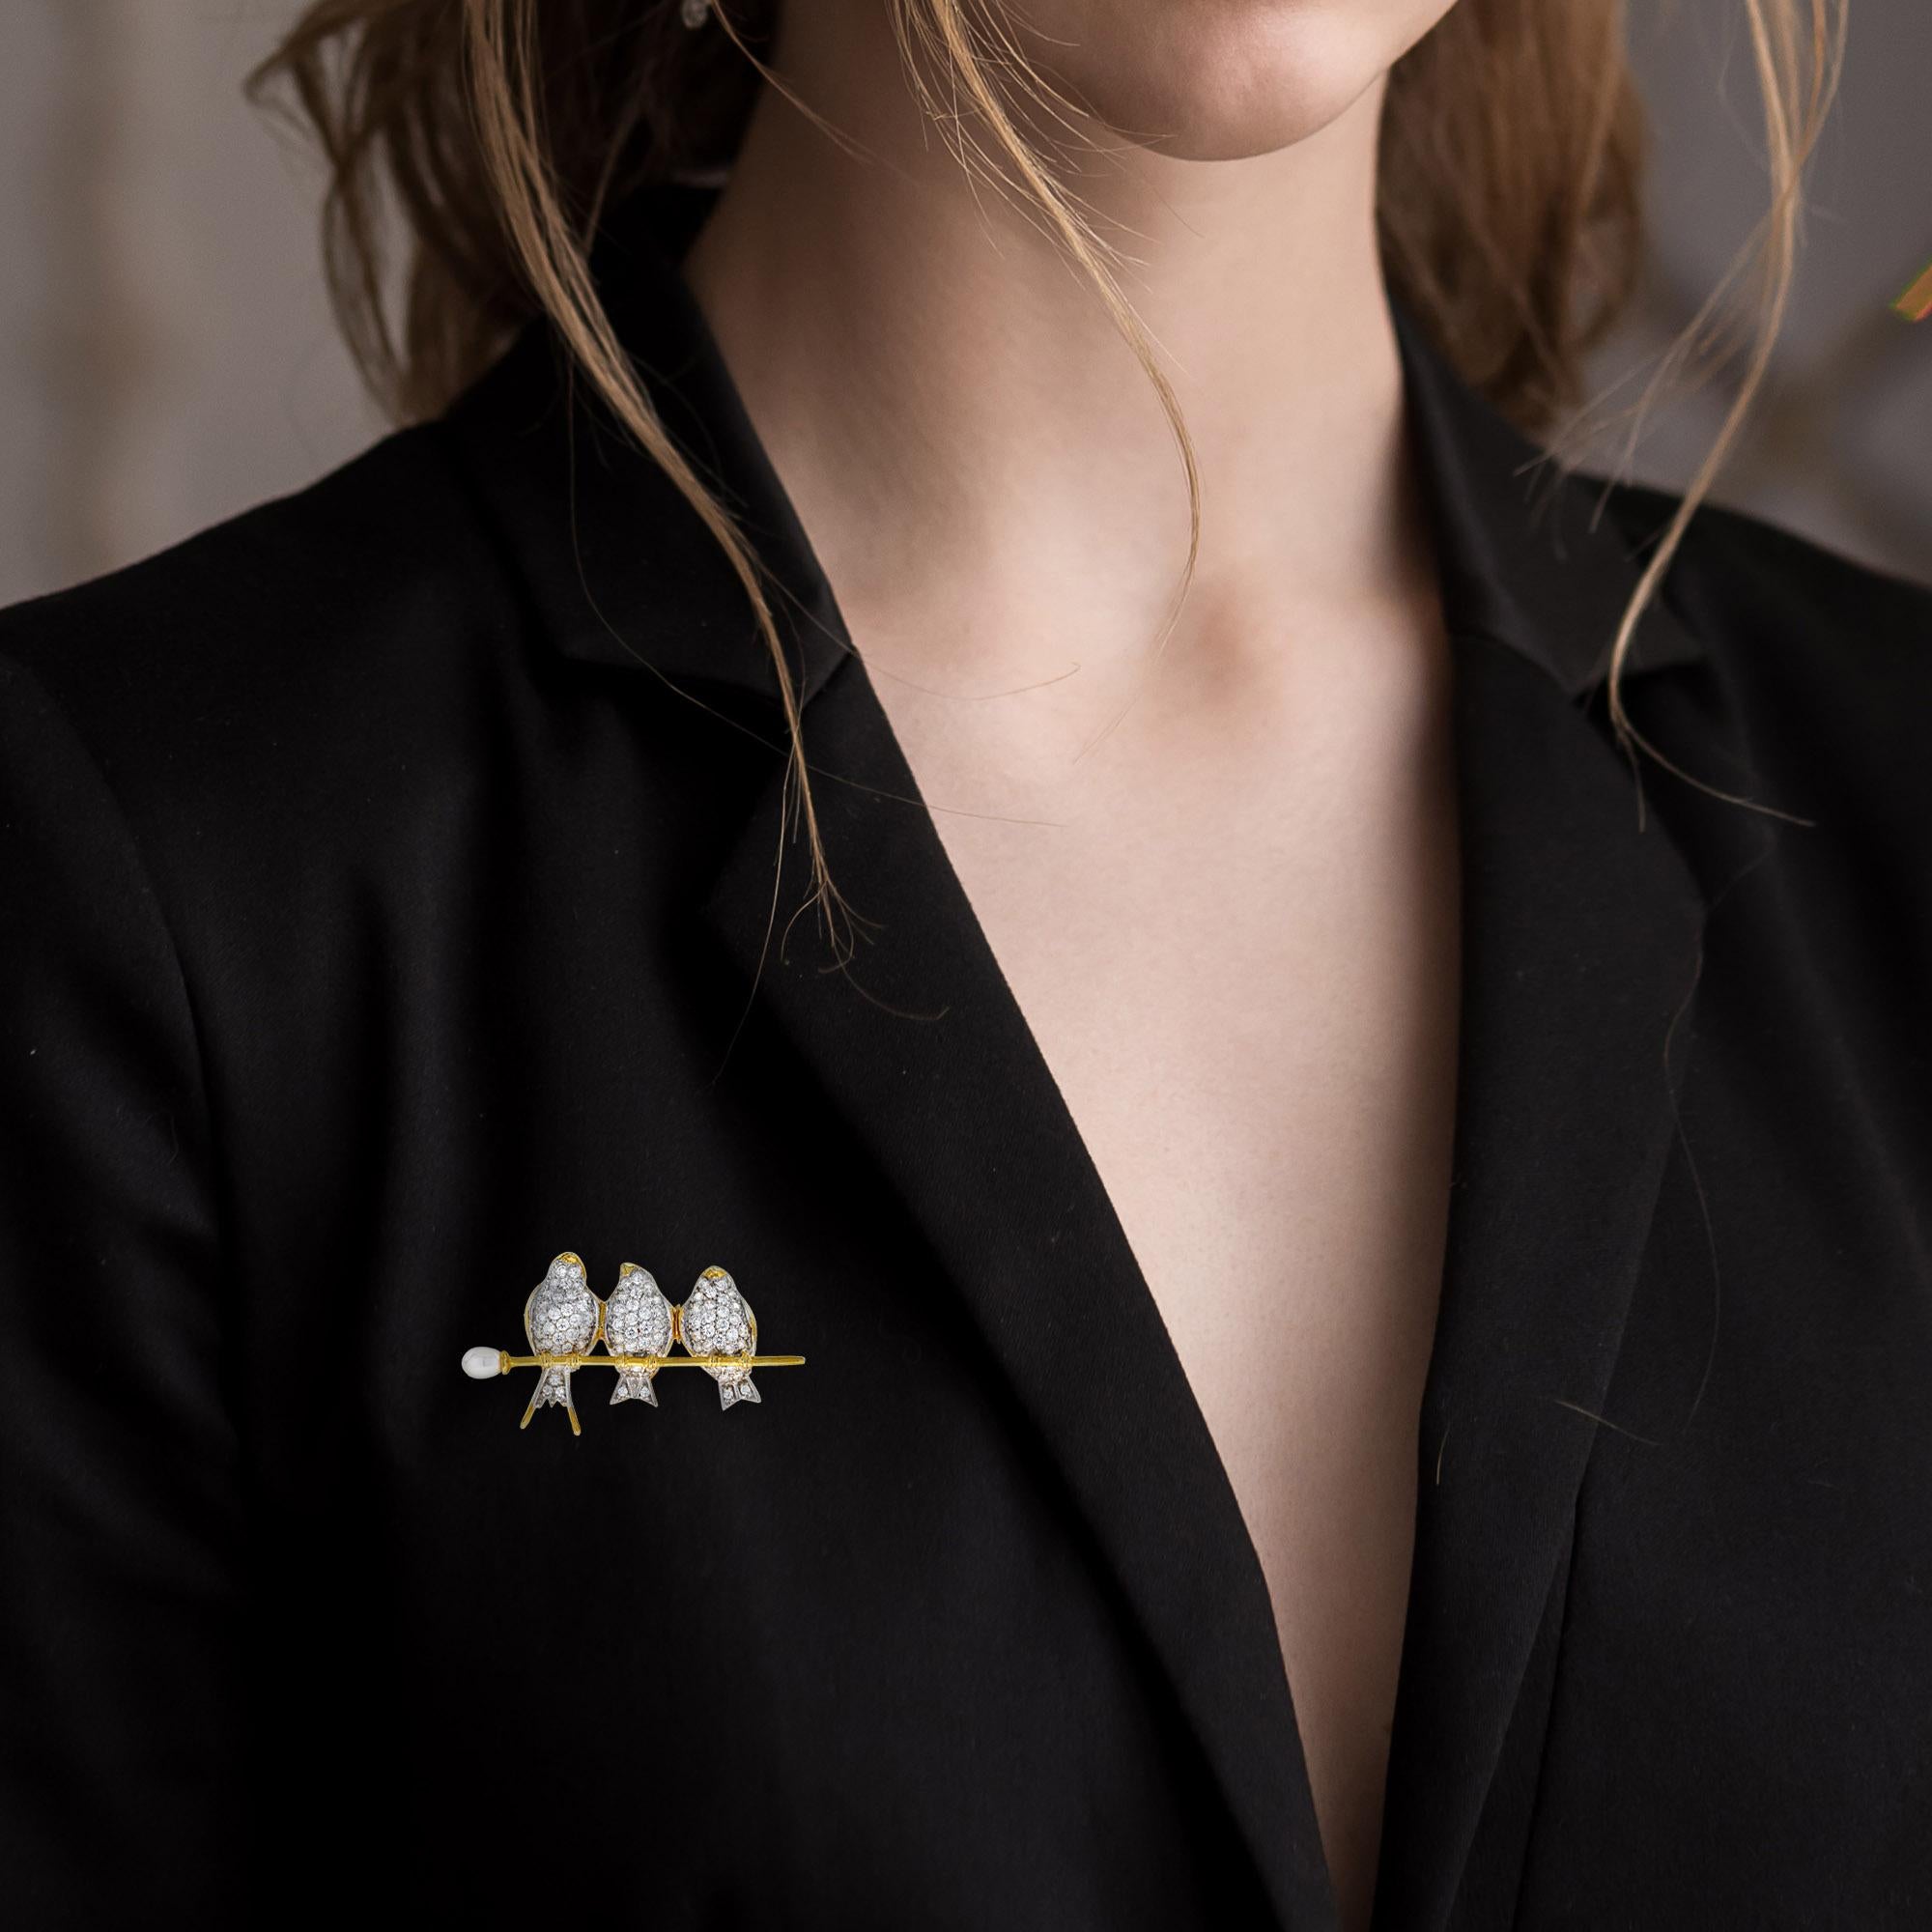 Three little singing birds sitting on a branch. Each bird has been studded with sparkling diamonds. The novelty birds brooch is therefore used in many cases to signify love and constancy across both distance and time. The branch is set with natural